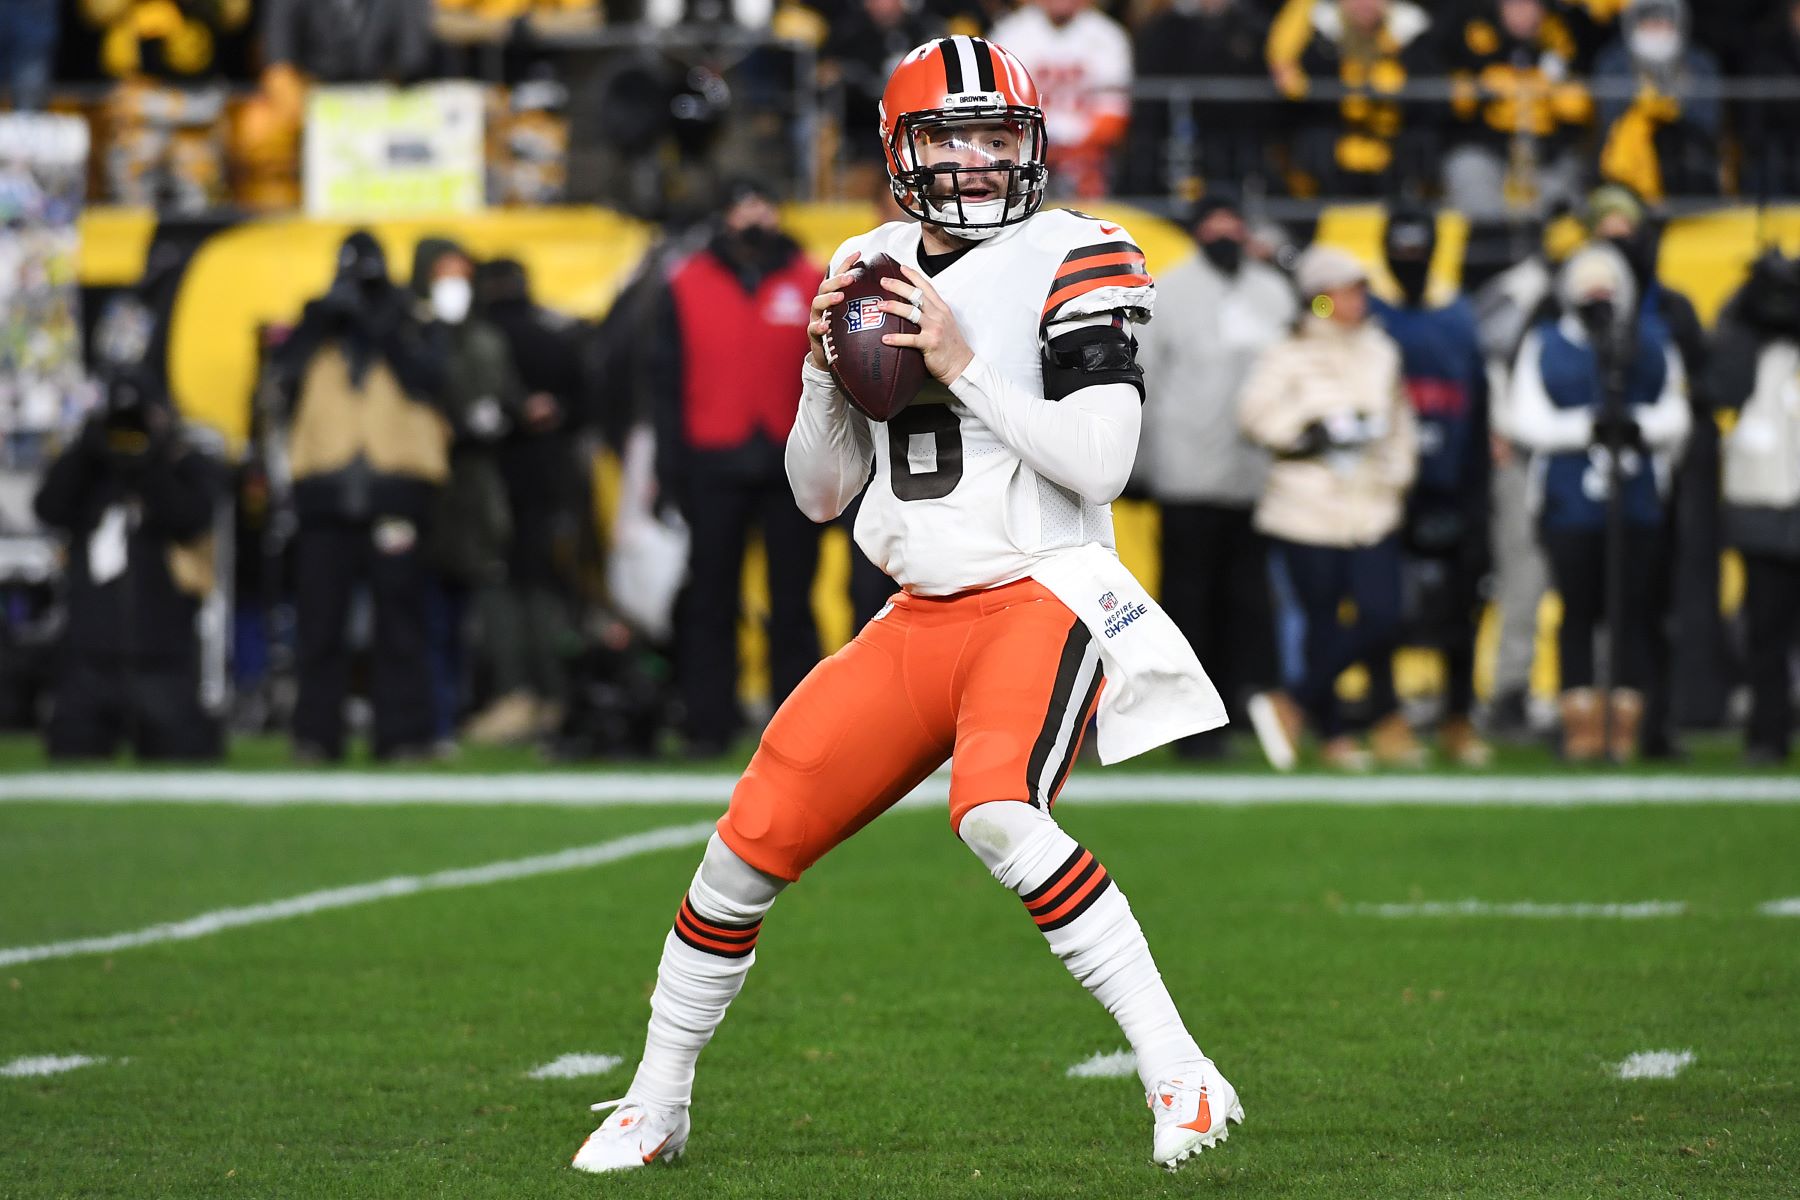 Quarterback Baker Mayfield #6 of the Cleveland Browns NFL team during a game against the Pittsburgh Steelers